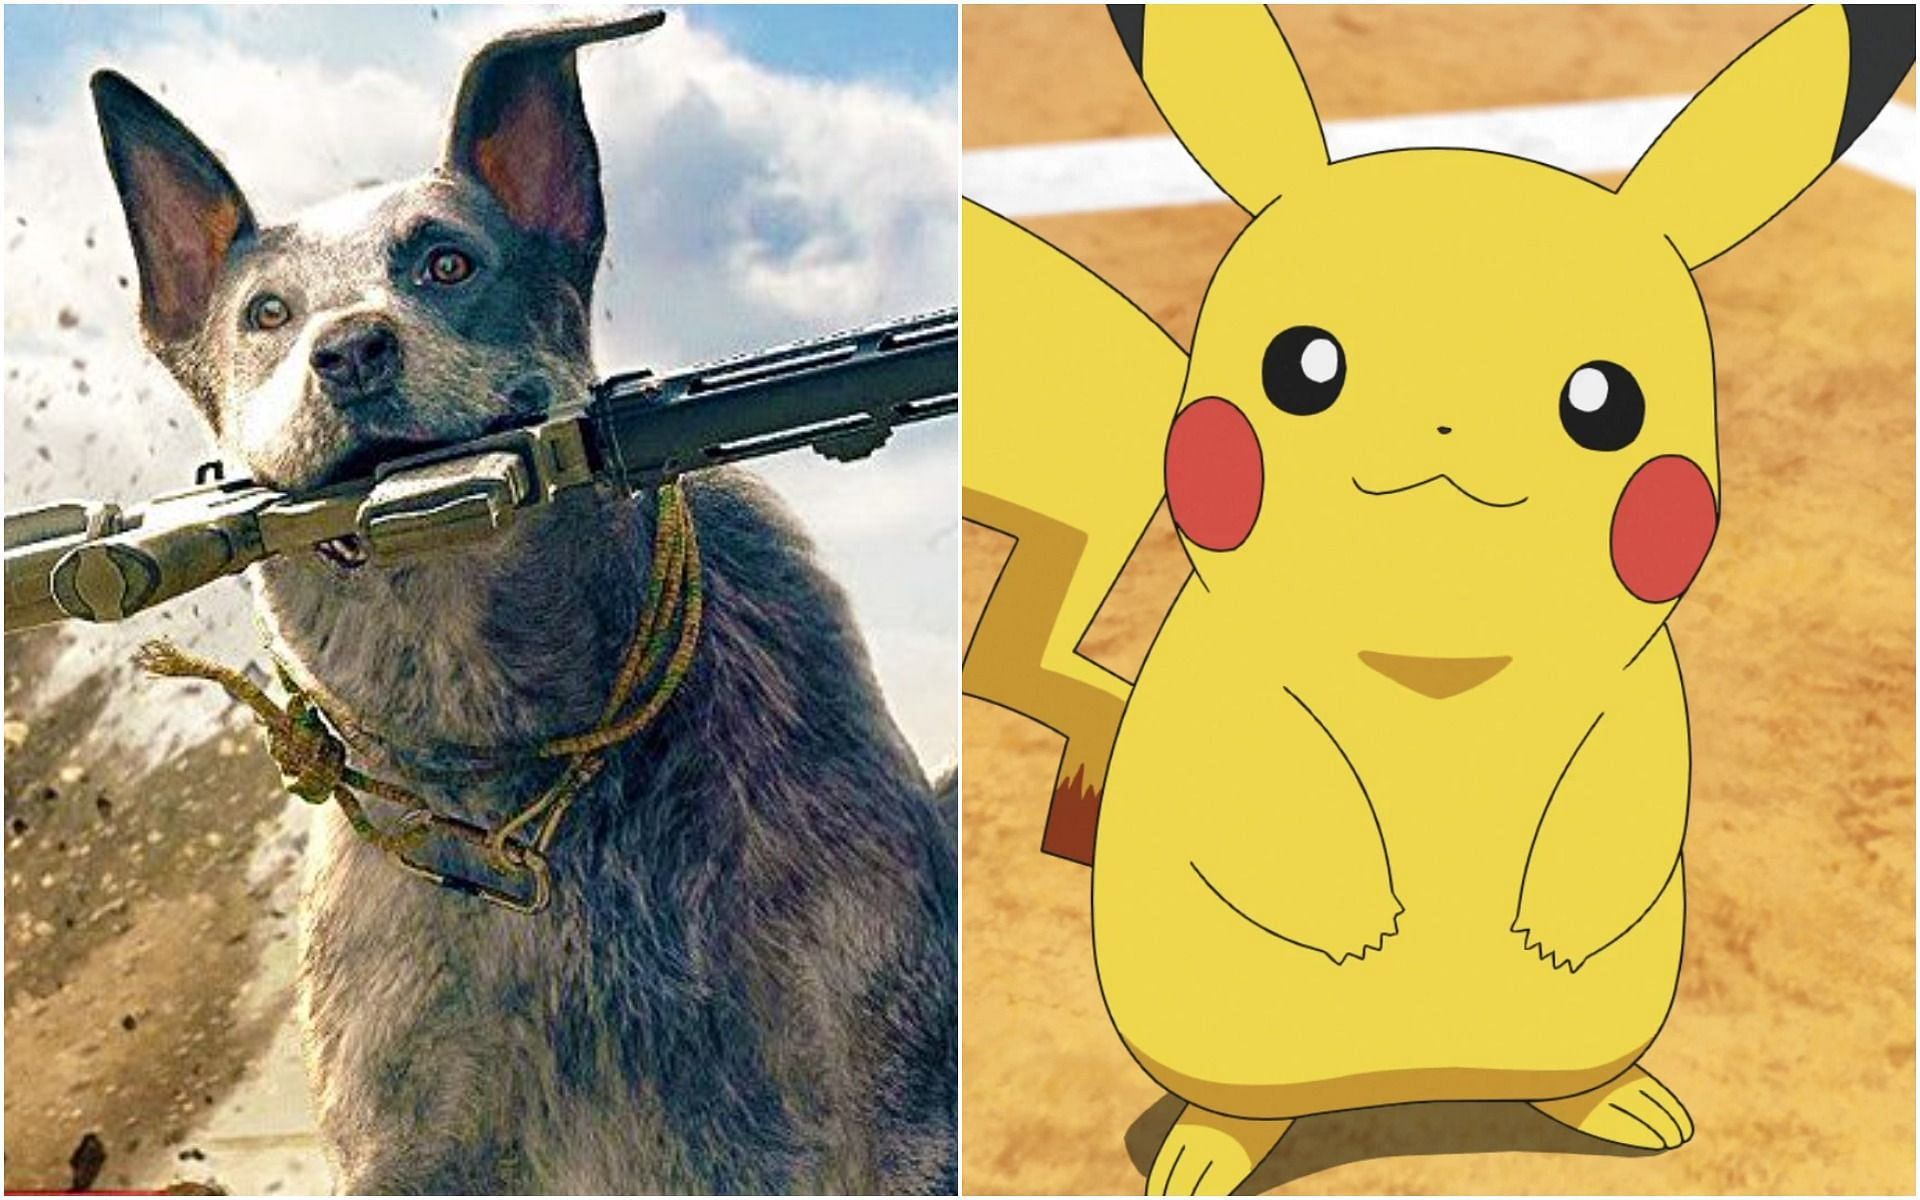 Animal companions in video games have their own fanbase (Image via Ubisoft and Nintendo)